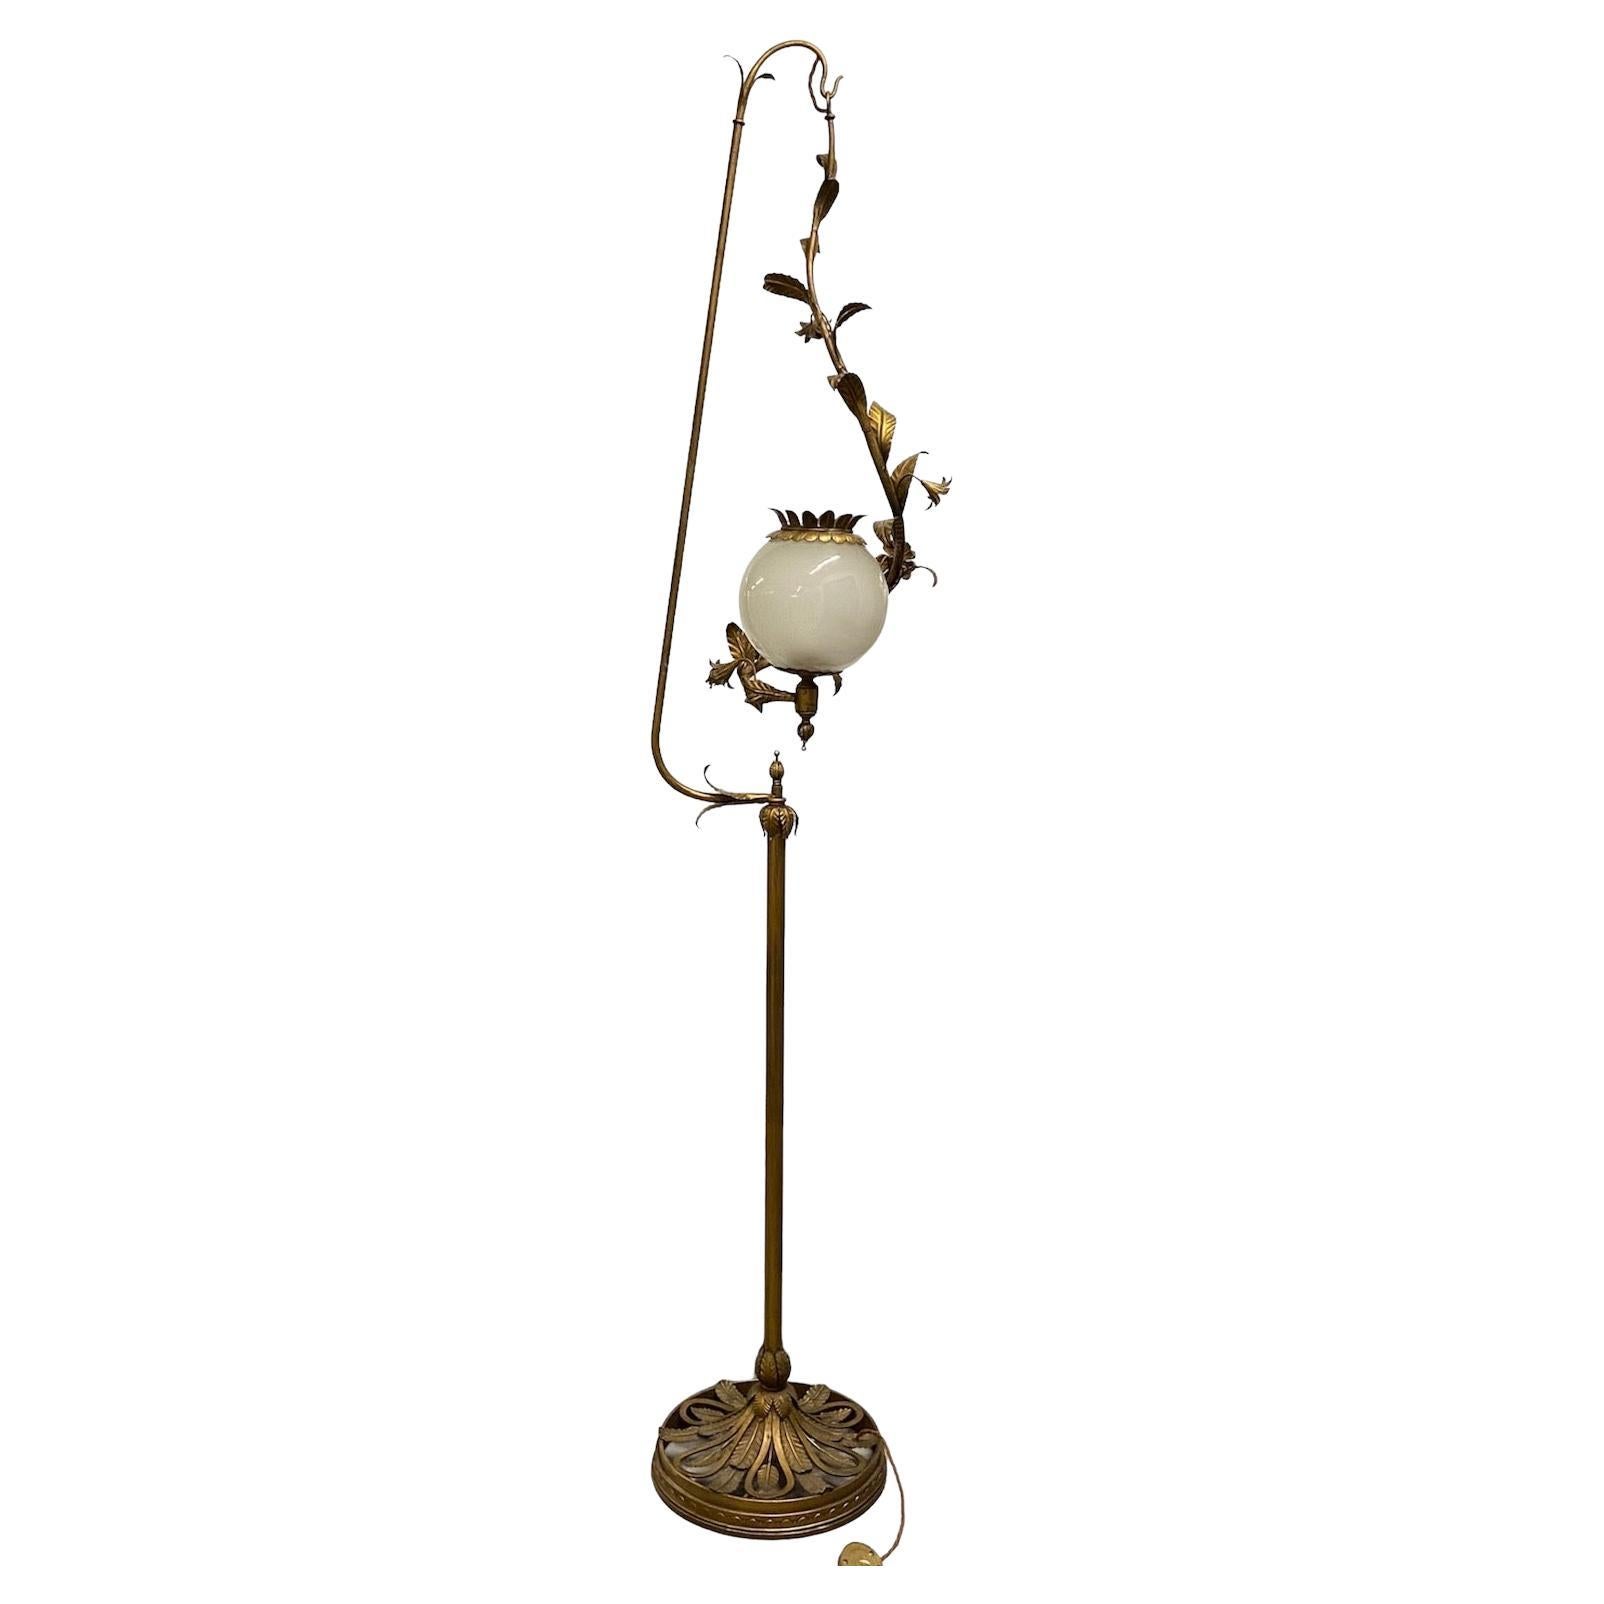 Italian brass and glass ornate floor lamp 1920's to 50's 2